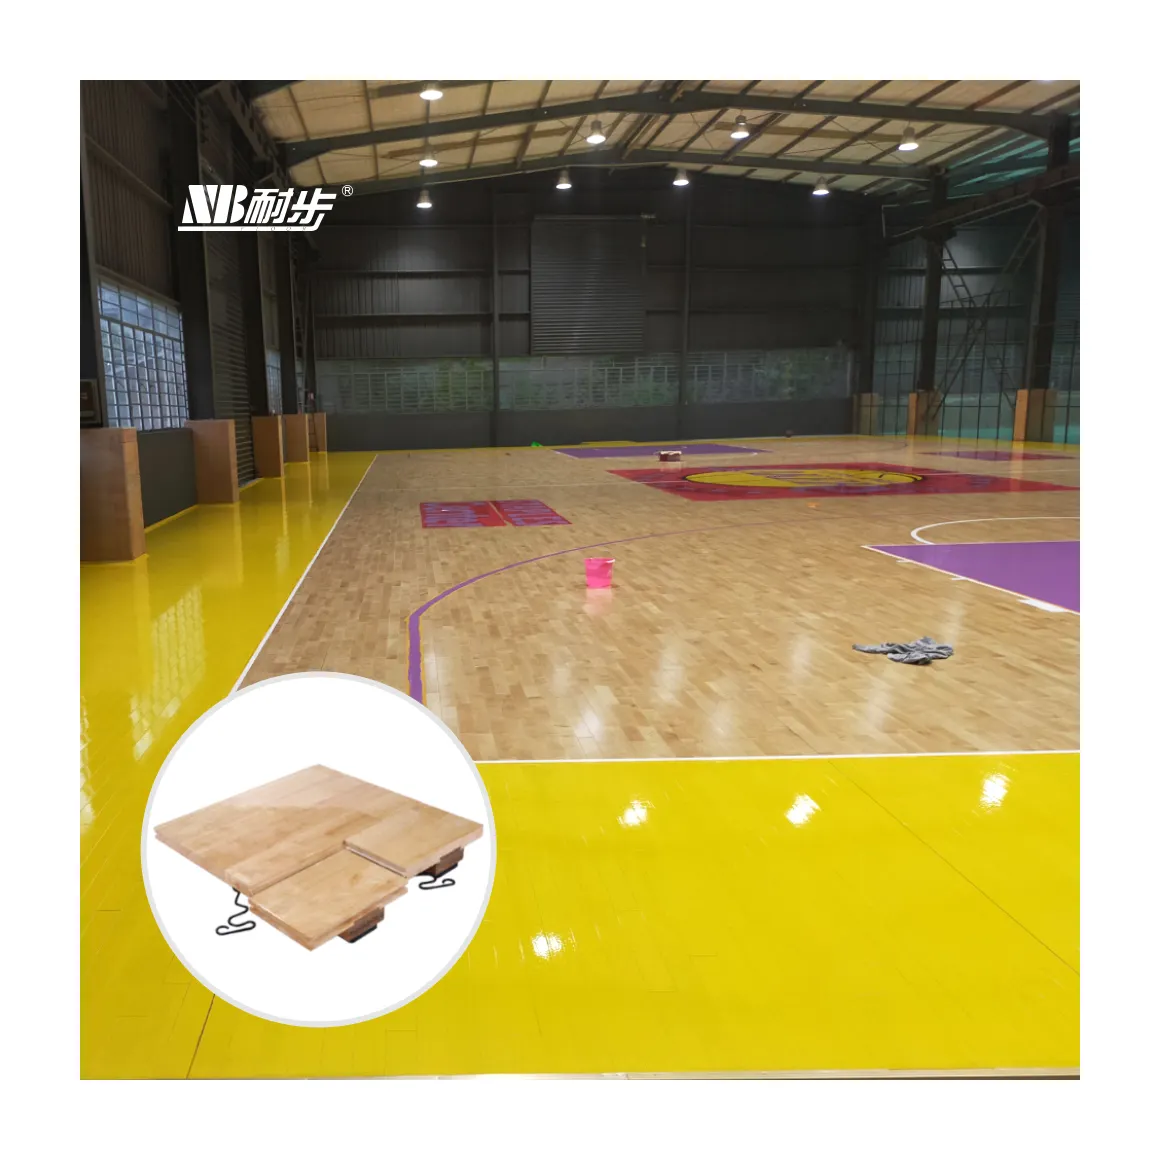 white oak haredwood flooring rubber tree gym floor basketball court solid wood paly ground indoor portable fixed timber maple